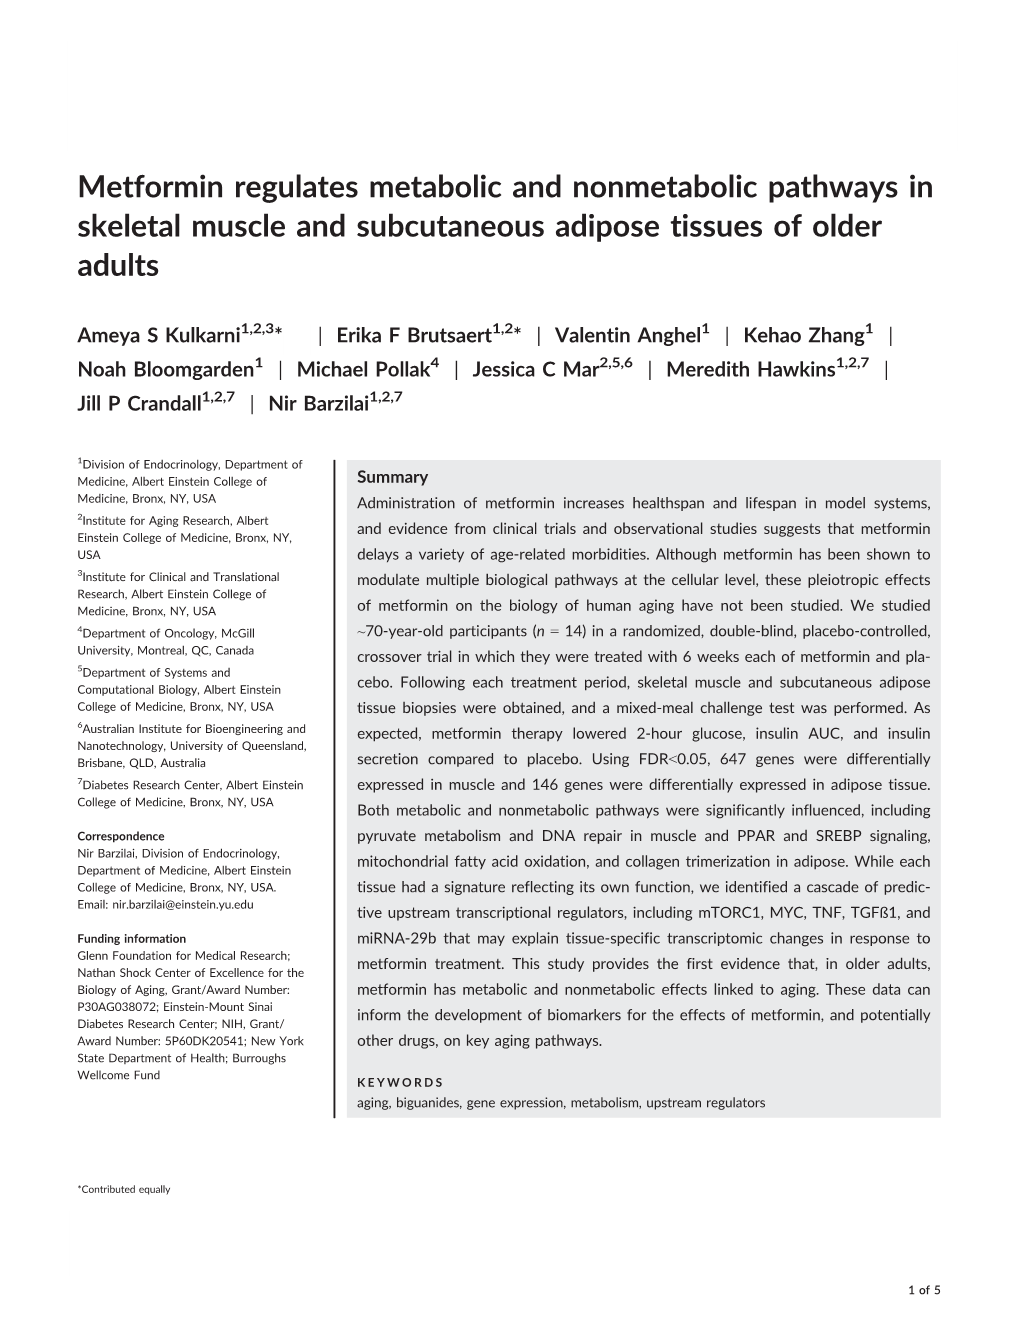 Metformin Regulates Metabolic and Nonmetabolic Pathways in Skeletal Muscle and Subcutaneous Adipose Tissues of Older Adults